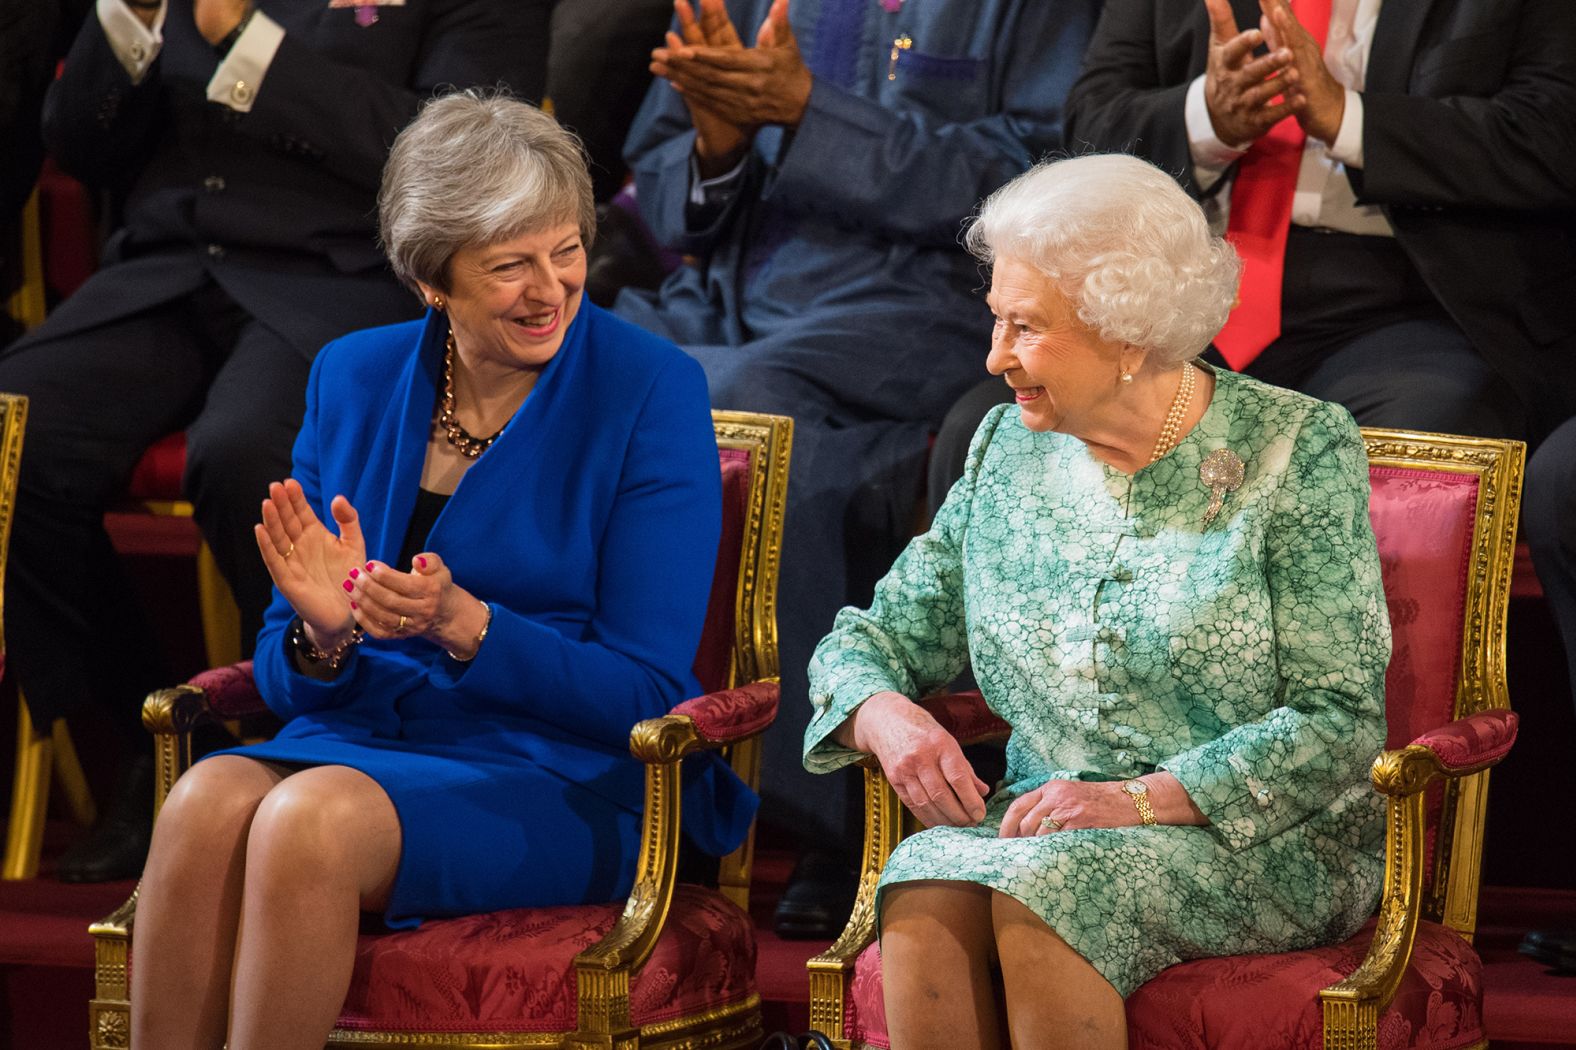 <strong>Theresa May (2016-2019):</strong> Following Cameron's resignation, May became the UK's second female prime minister. Not a lot is publicly known about their personal relationship, but the pair reportedly built up a strong rapport over the three years May was in office. Addressing the media ahead of tendering her notice to the Queen, May <a href="https://www.cnn.com/videos/world/2019/07/24/theresa-may-final-speech-prime-minister-uk-sot-vpx.cnn" target="_blank">described serving as PM</a> as "the greatest honor." 